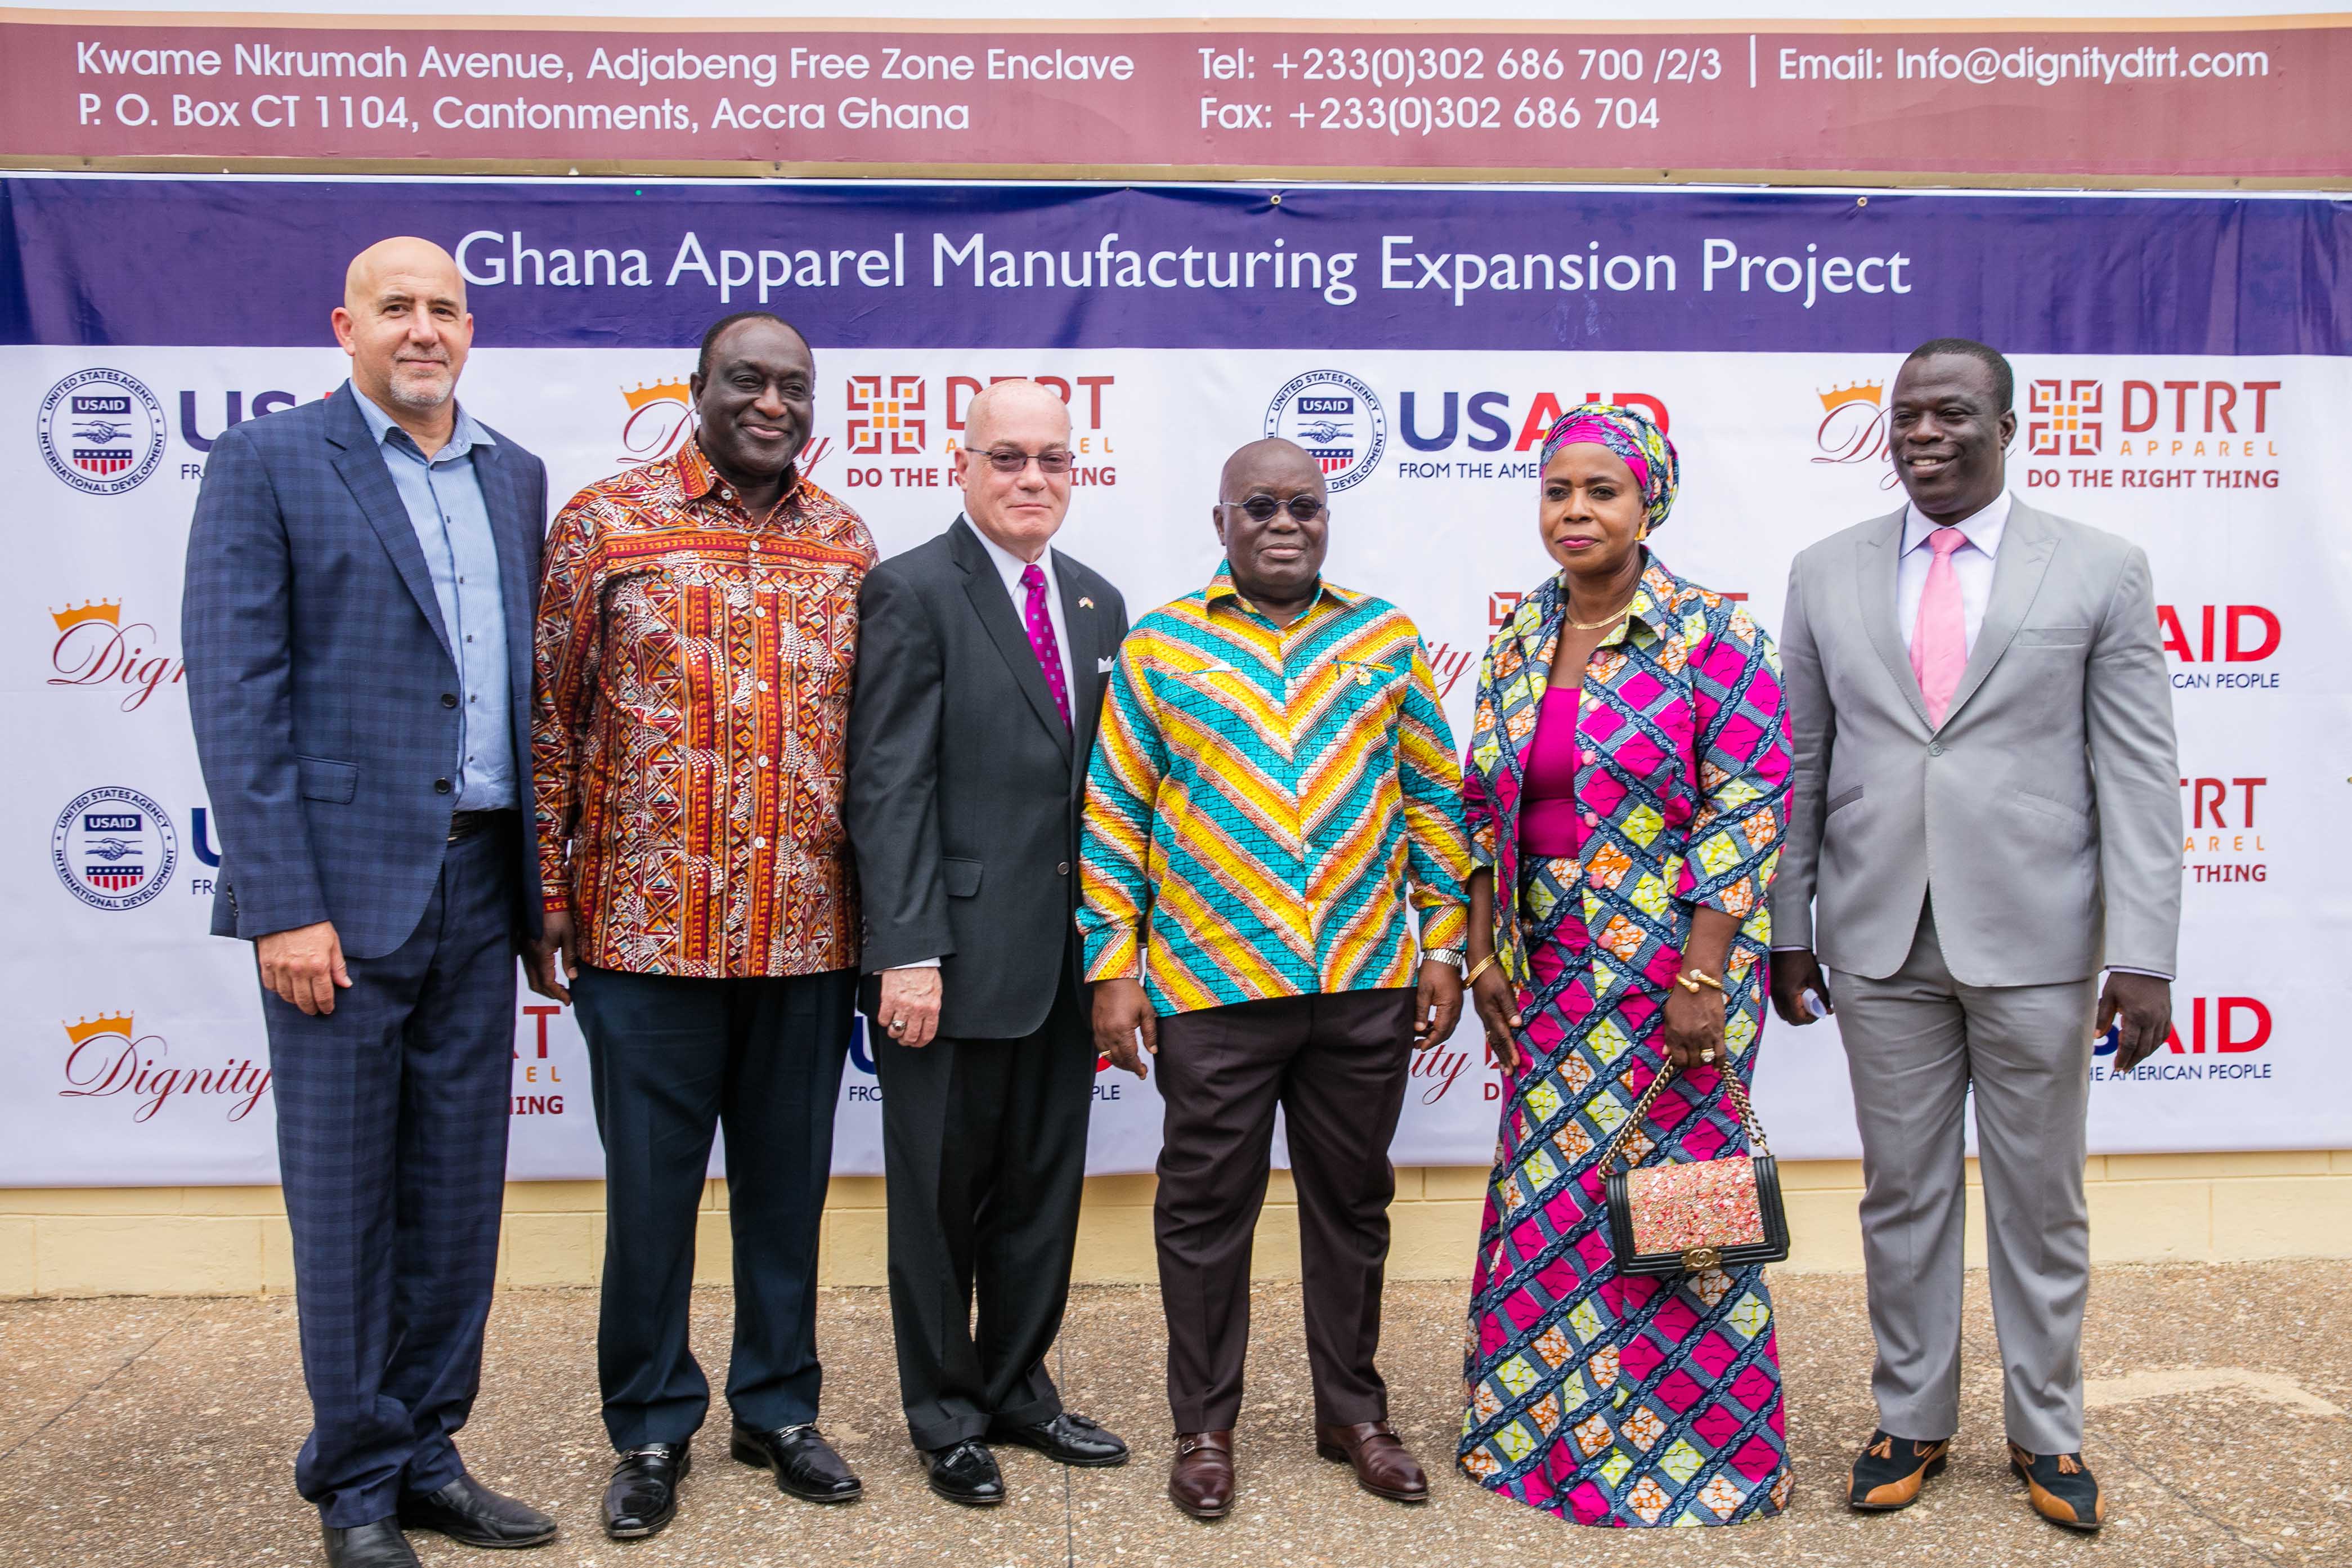 More than 1,100 new jobs, USAID supports Dignity DTRT Limited Ghana